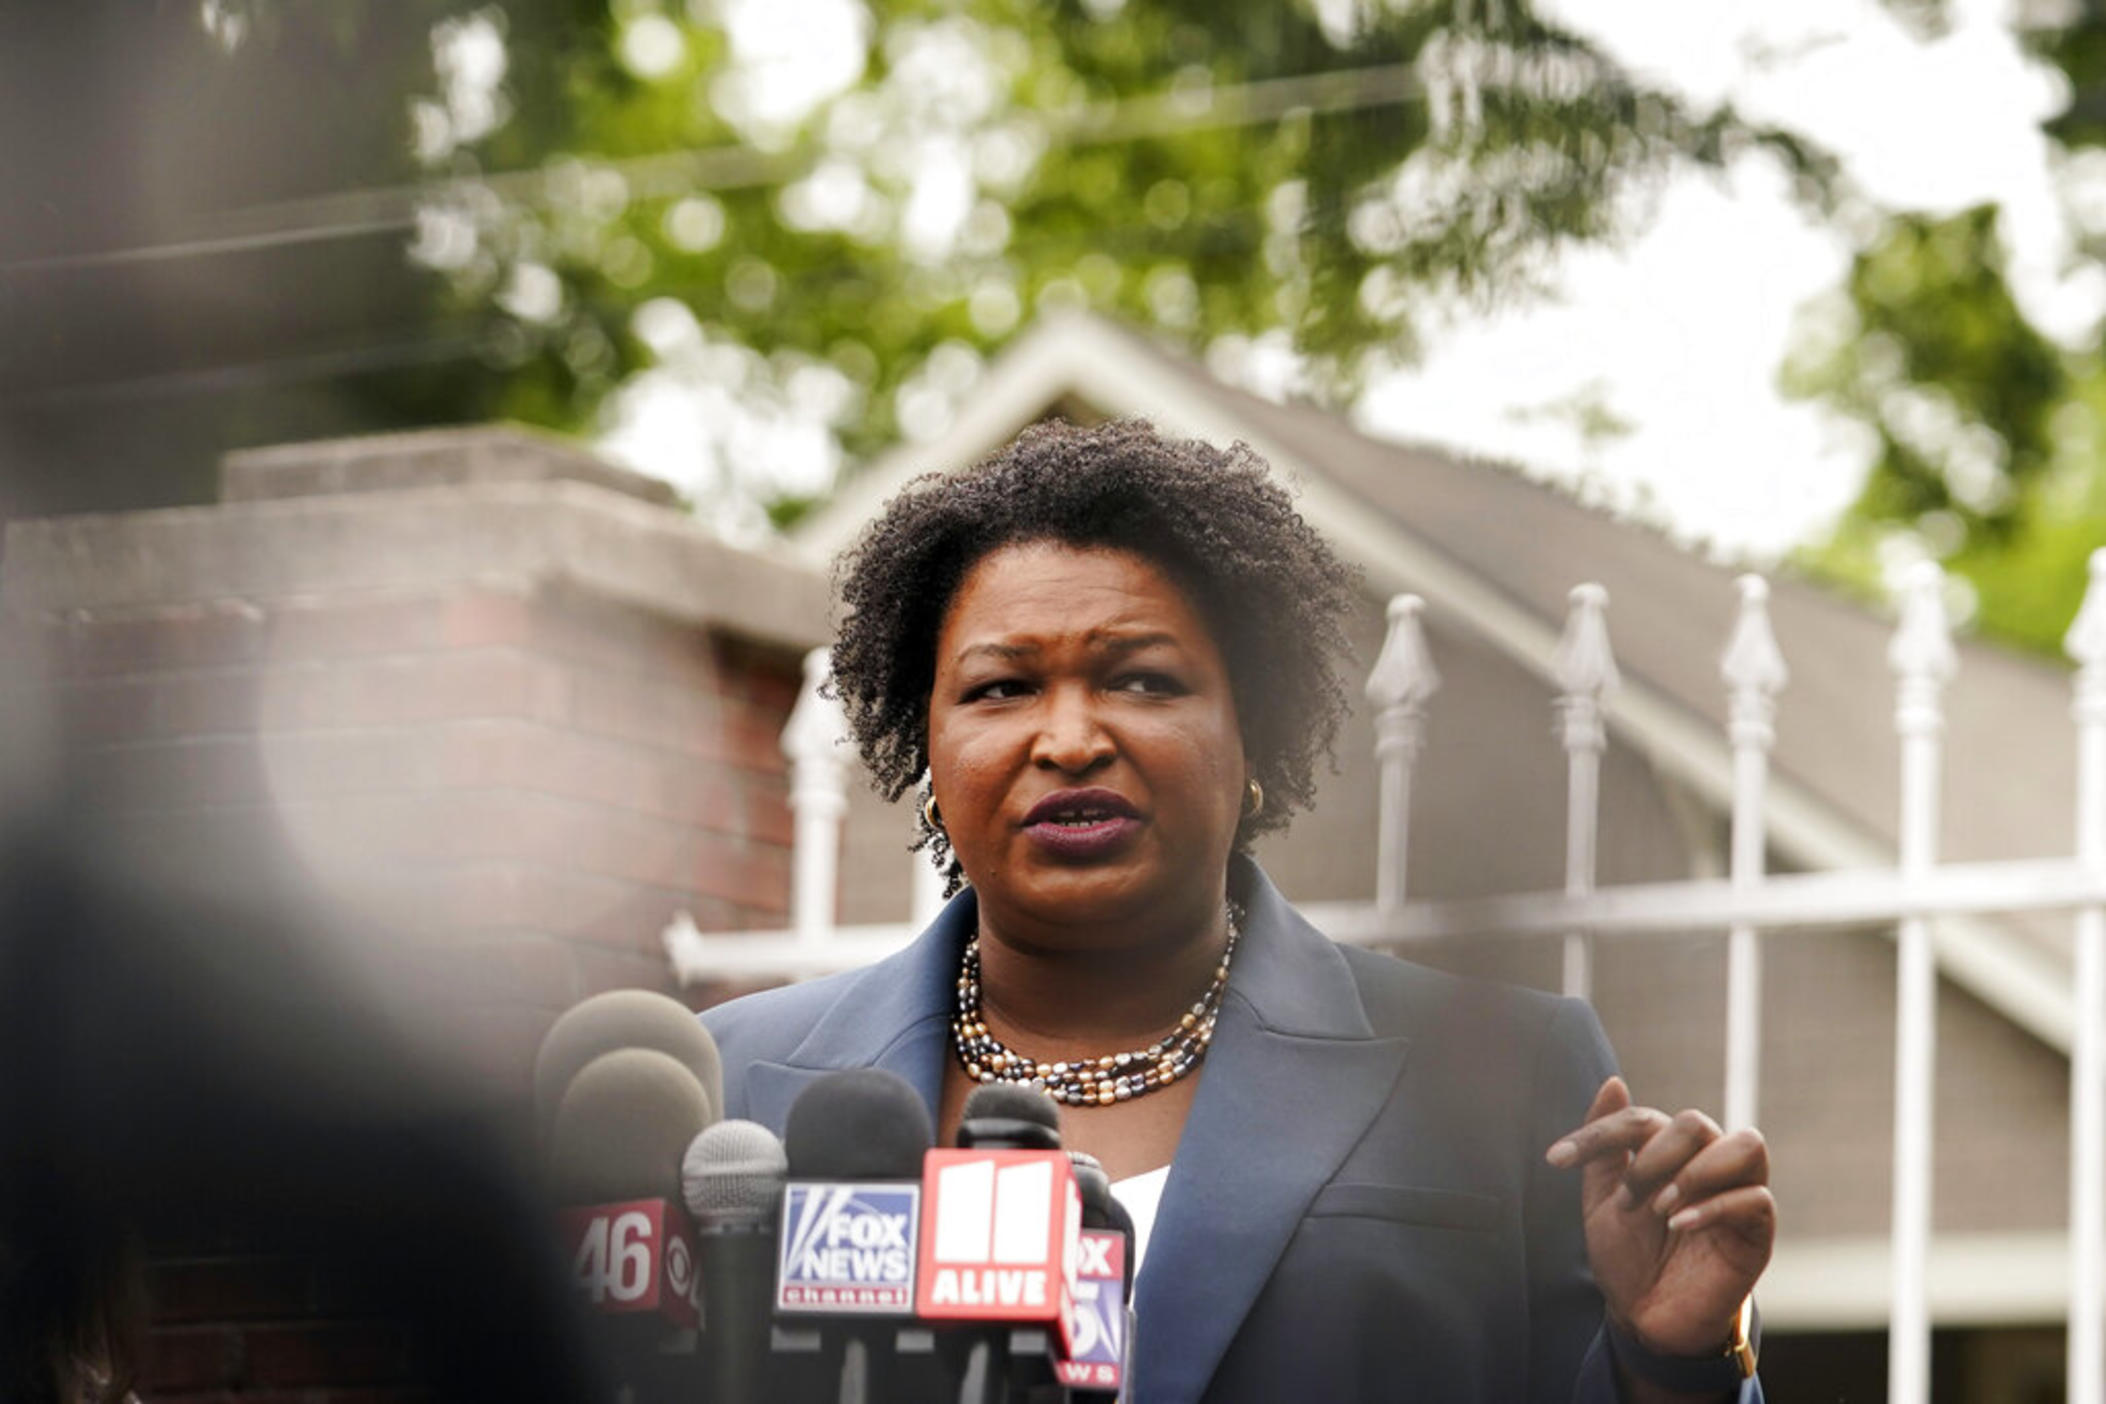 Georgia Democratic gubernatorial candidate Stacey Abrams talks to the media during Georgia's primary election on Tuesday, May 24, 2022, in Atlanta.